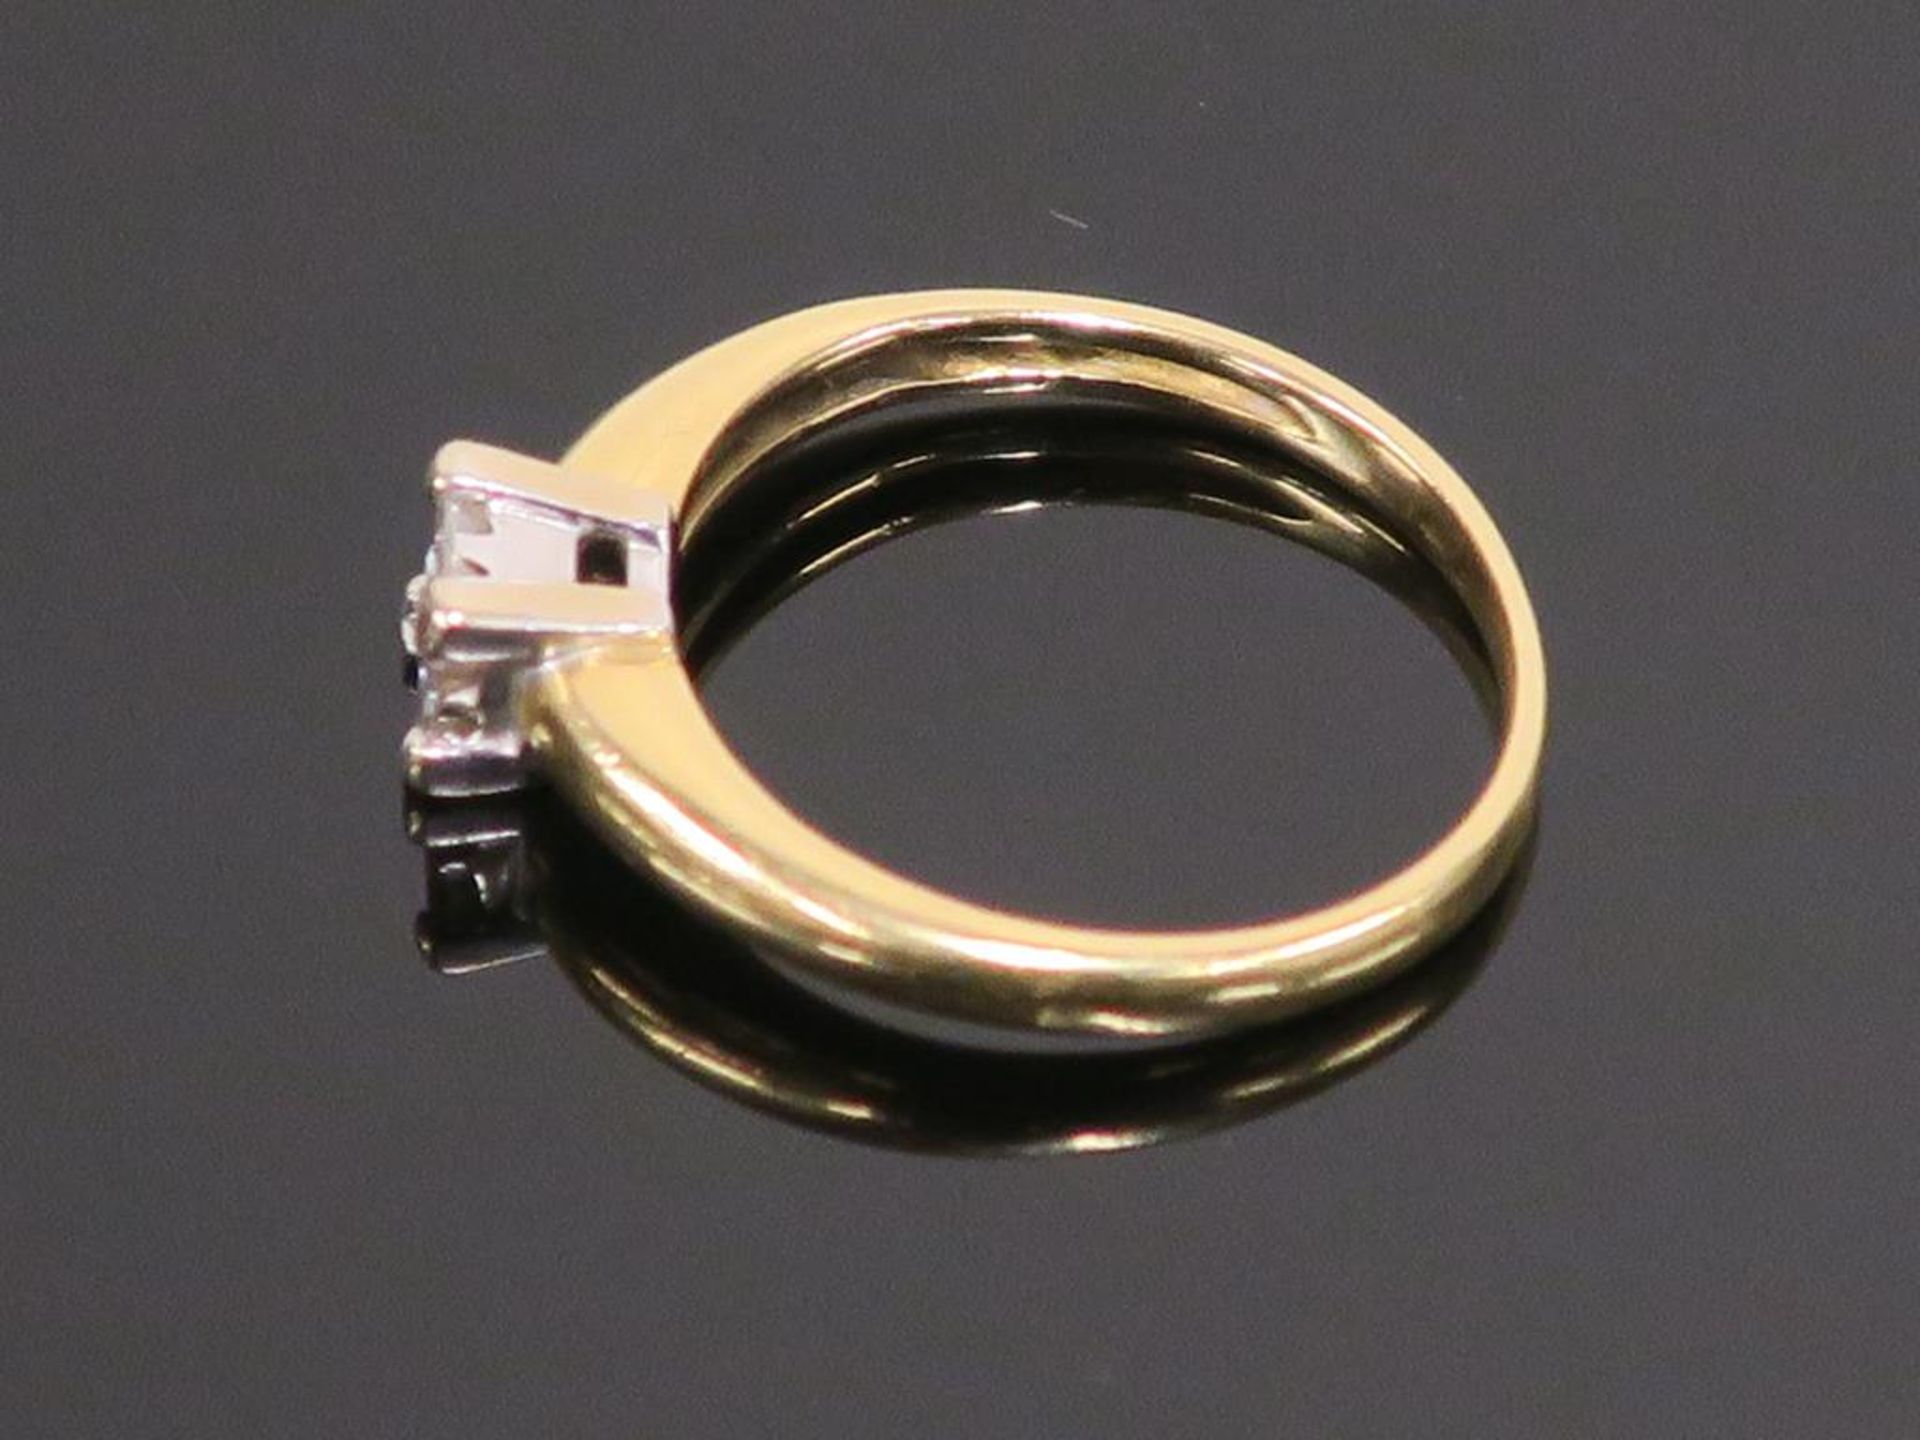 A 9ct Gold Diamond Solitaire Ring size L (weight 2.4g) (est £80-£120) - Image 3 of 3